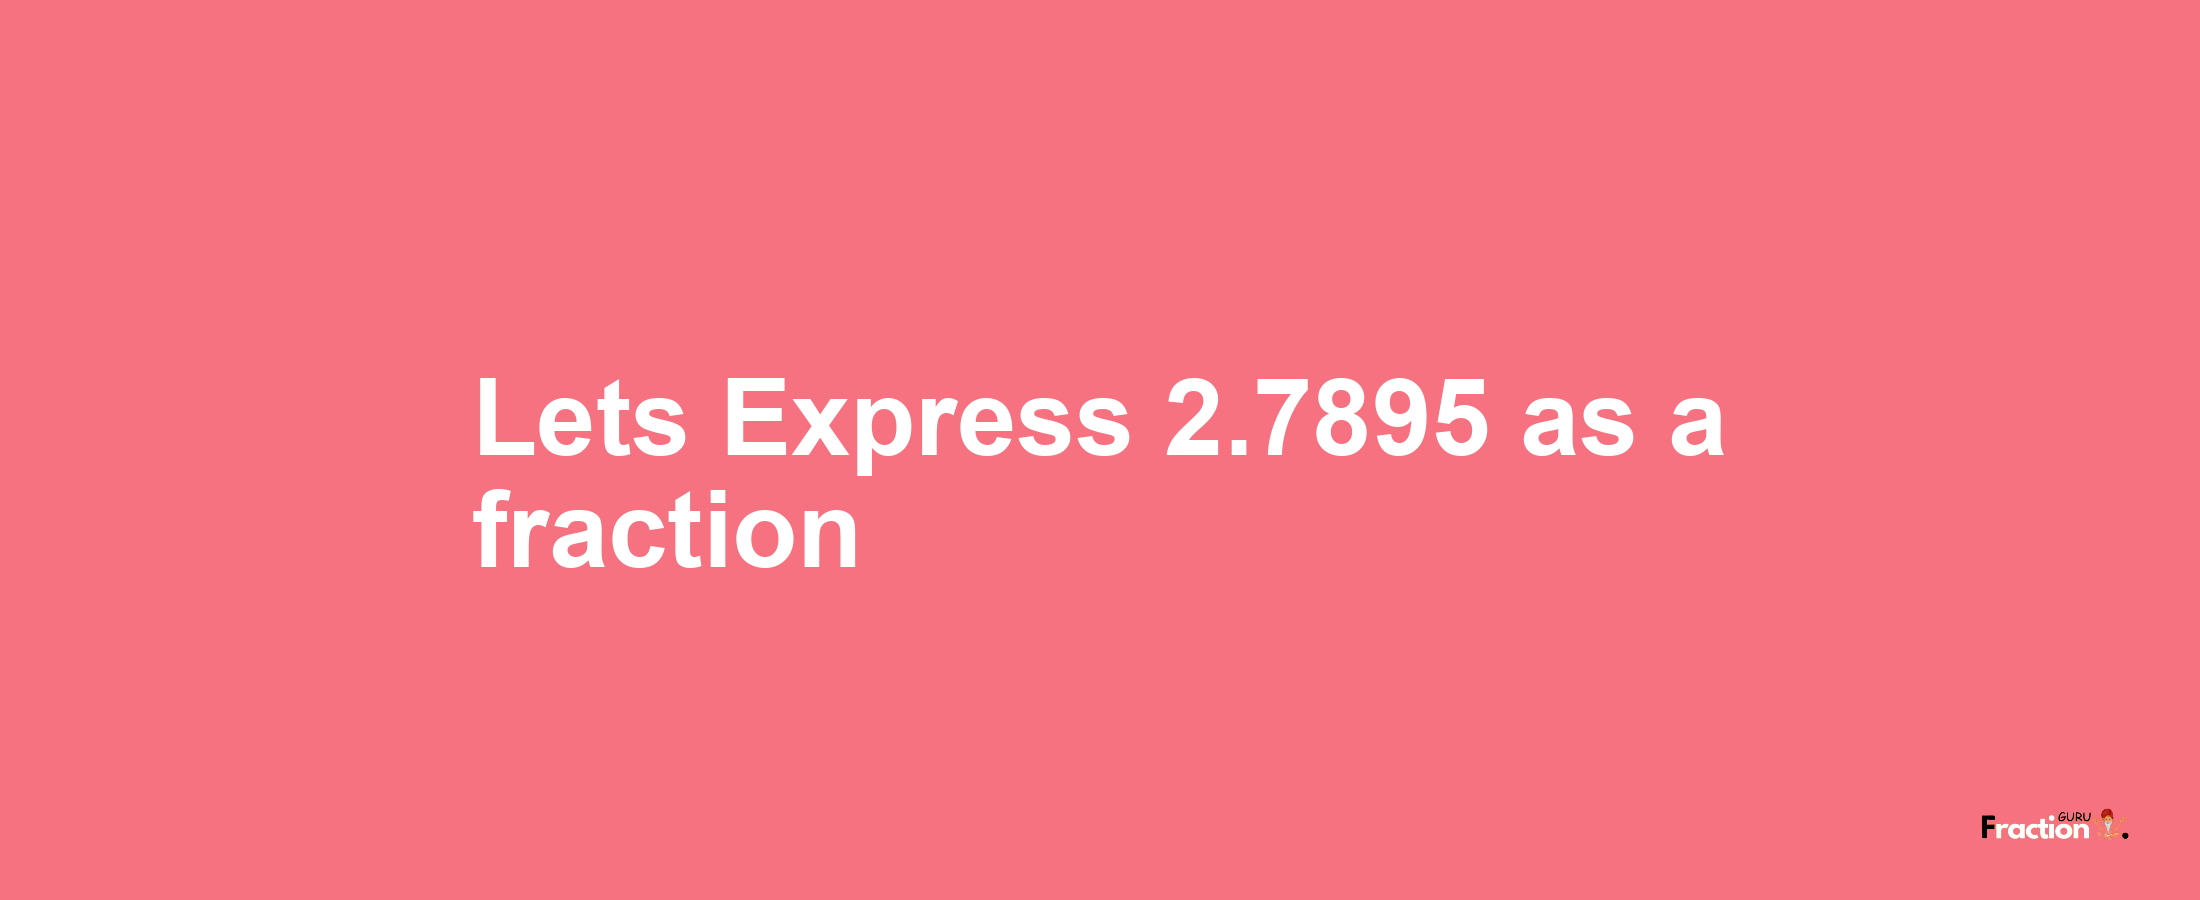 Lets Express 2.7895 as afraction